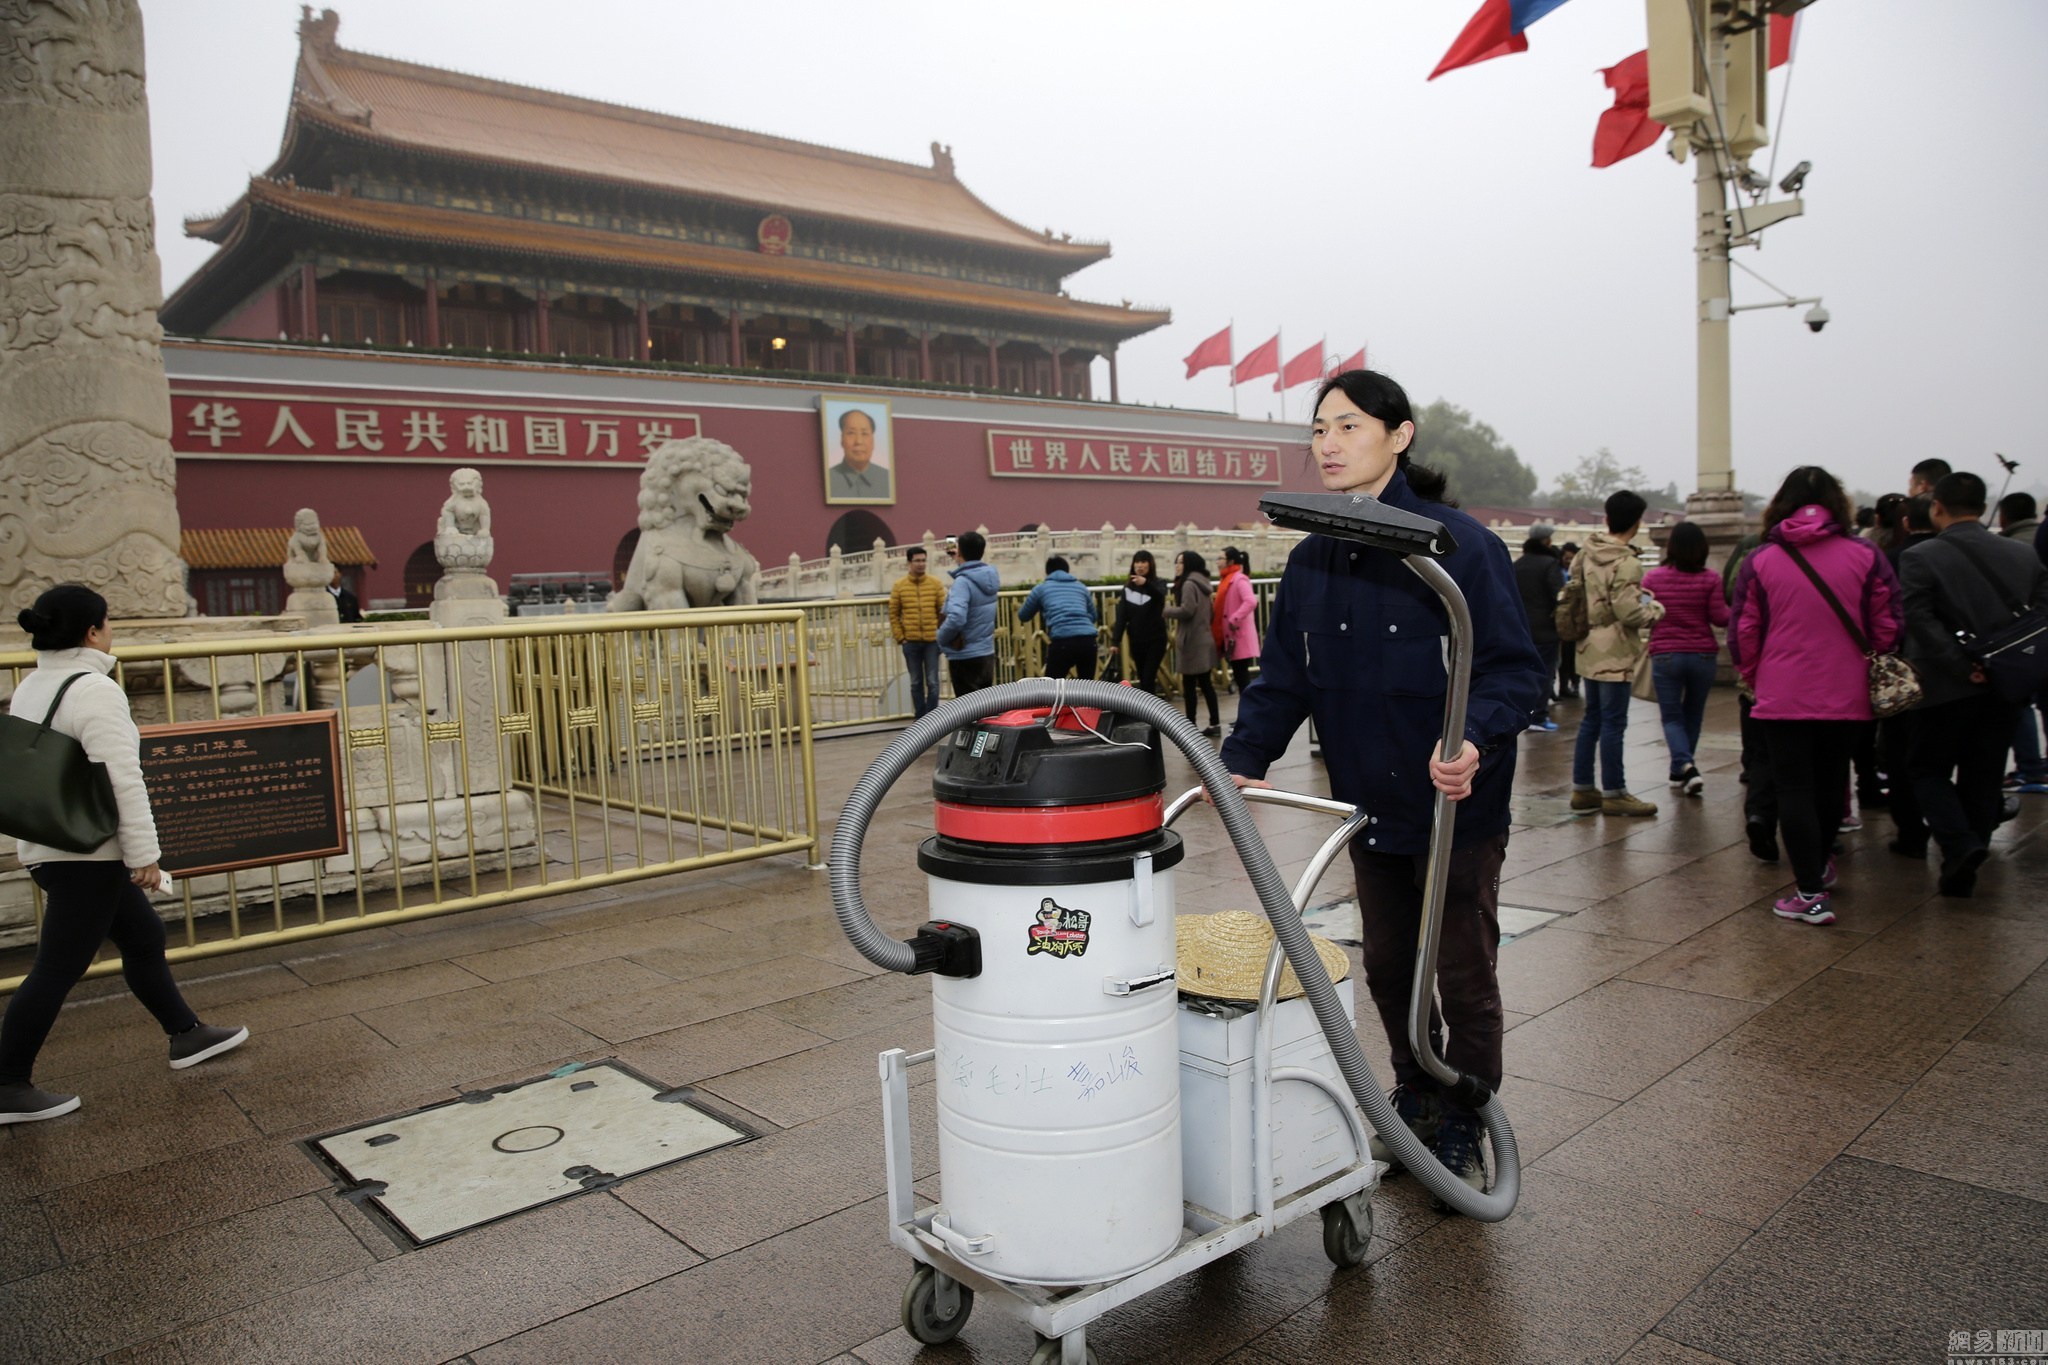 100-Day Performance Art Piece: Dust Vacuumed From tiananmen square